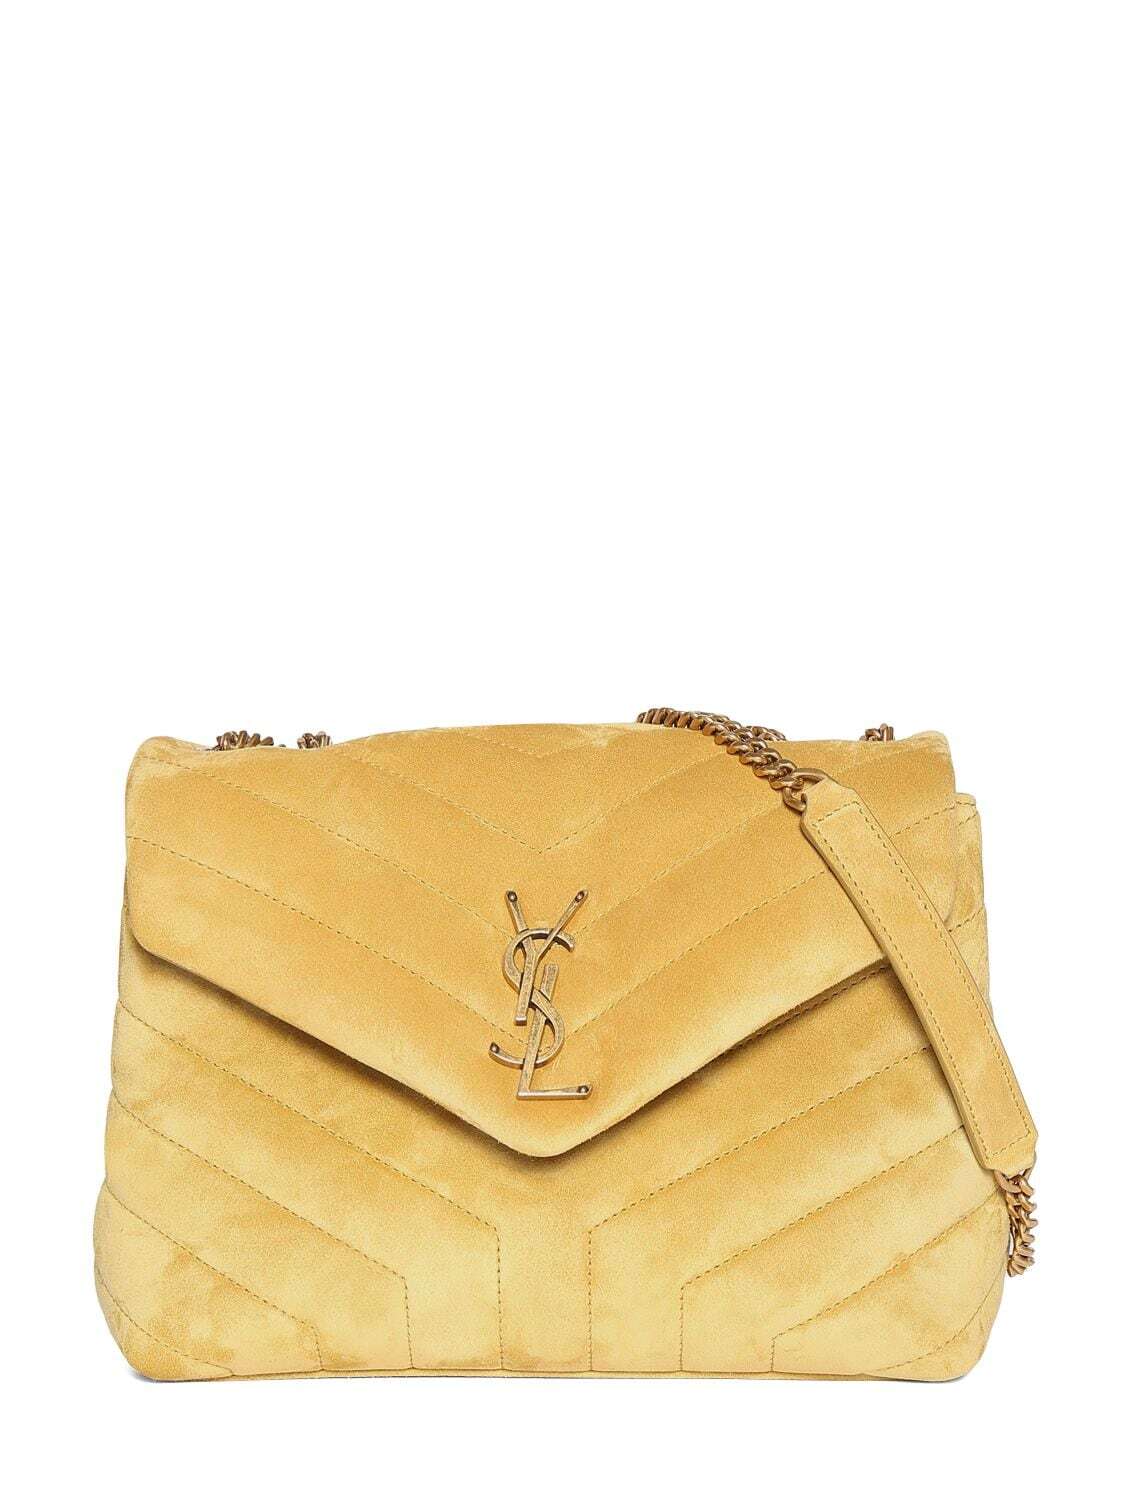 SAINT LAURENT Small Loulou Monogram Quilted Suede Bag